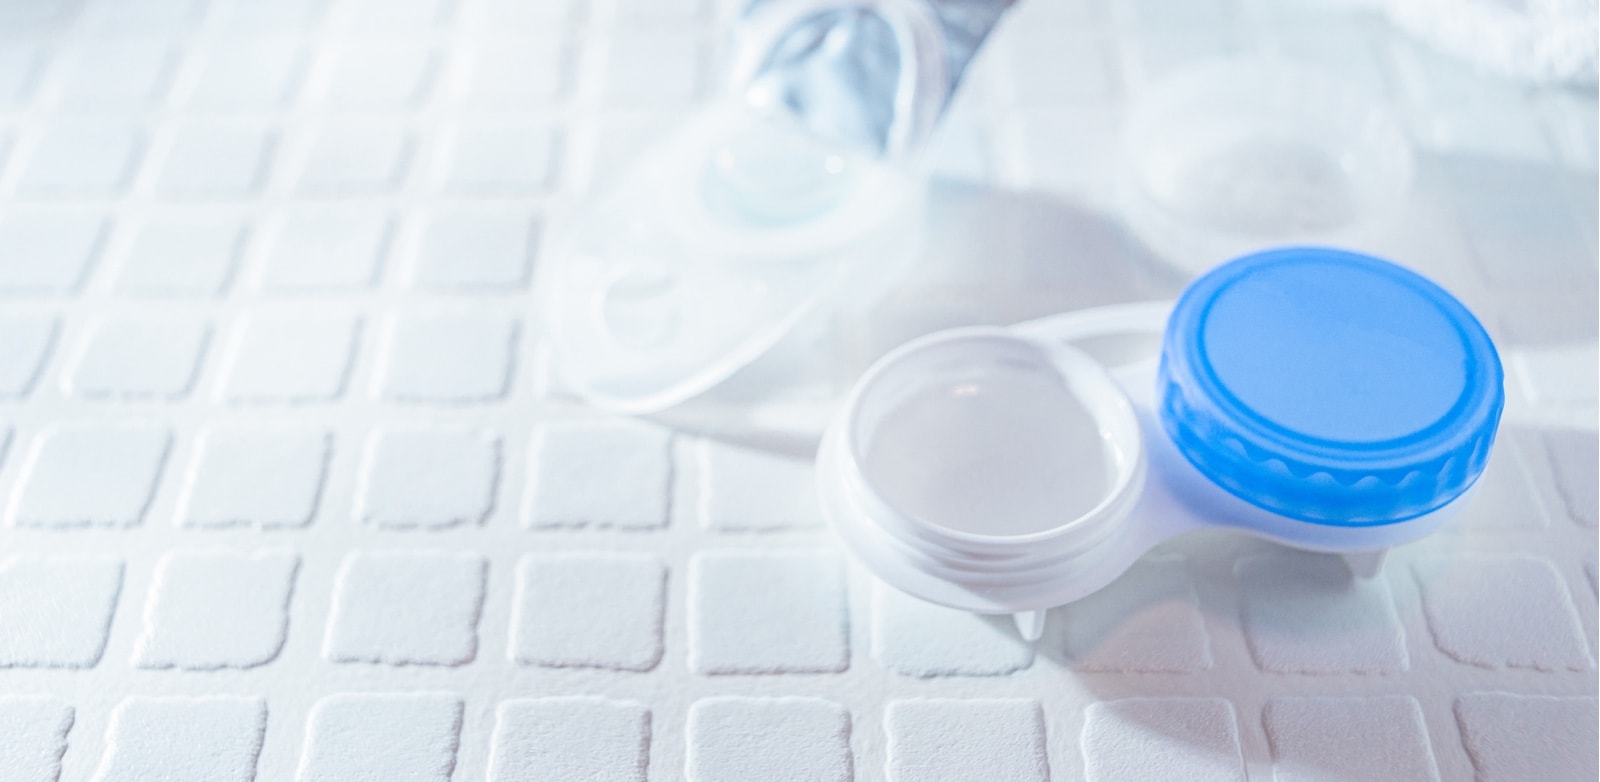 What if you accidentally used expired contact lens solution?